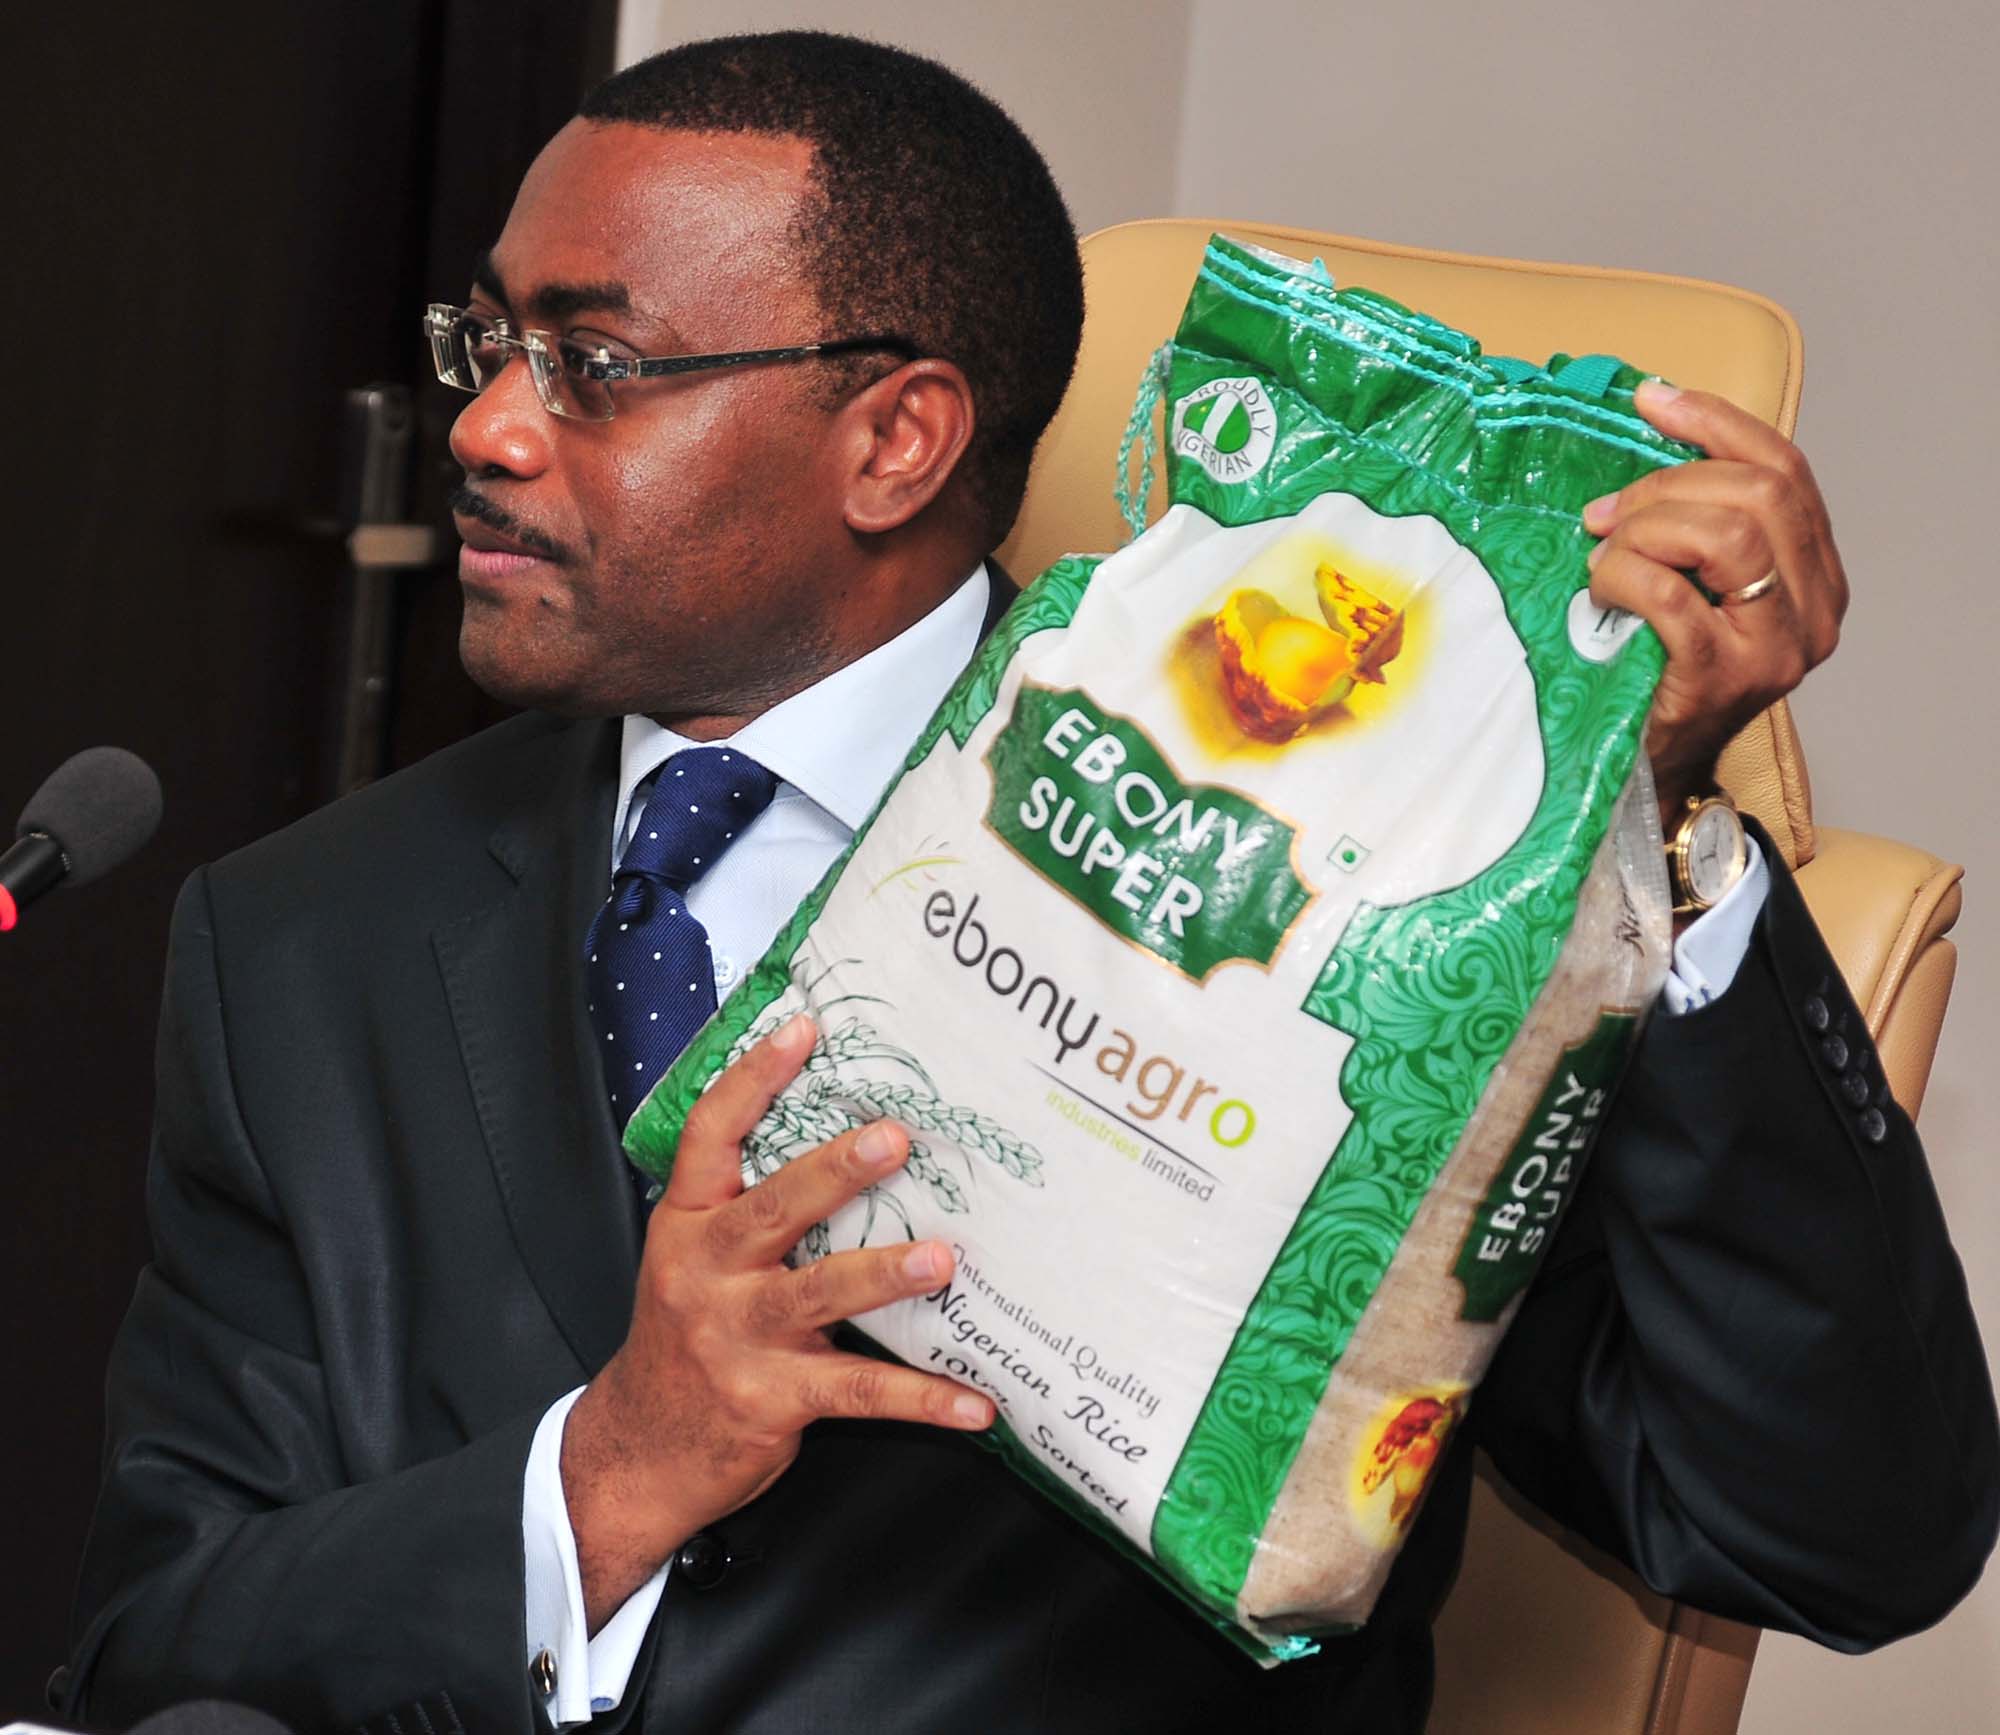 PIC. 14.  MINISTER OF AGRICULTURE AND RURAL DEVELOPMENT, DR AKINWUMI ADESINA,  DISPLAYING EBONY SUPER RICE DURING A NEWS CONFERENCE ON THE JUST CONCLUDED  AGRICULTURAL SHOW IN THE U.S. ON FRIDAY (19/4/12) IN ABUJA.